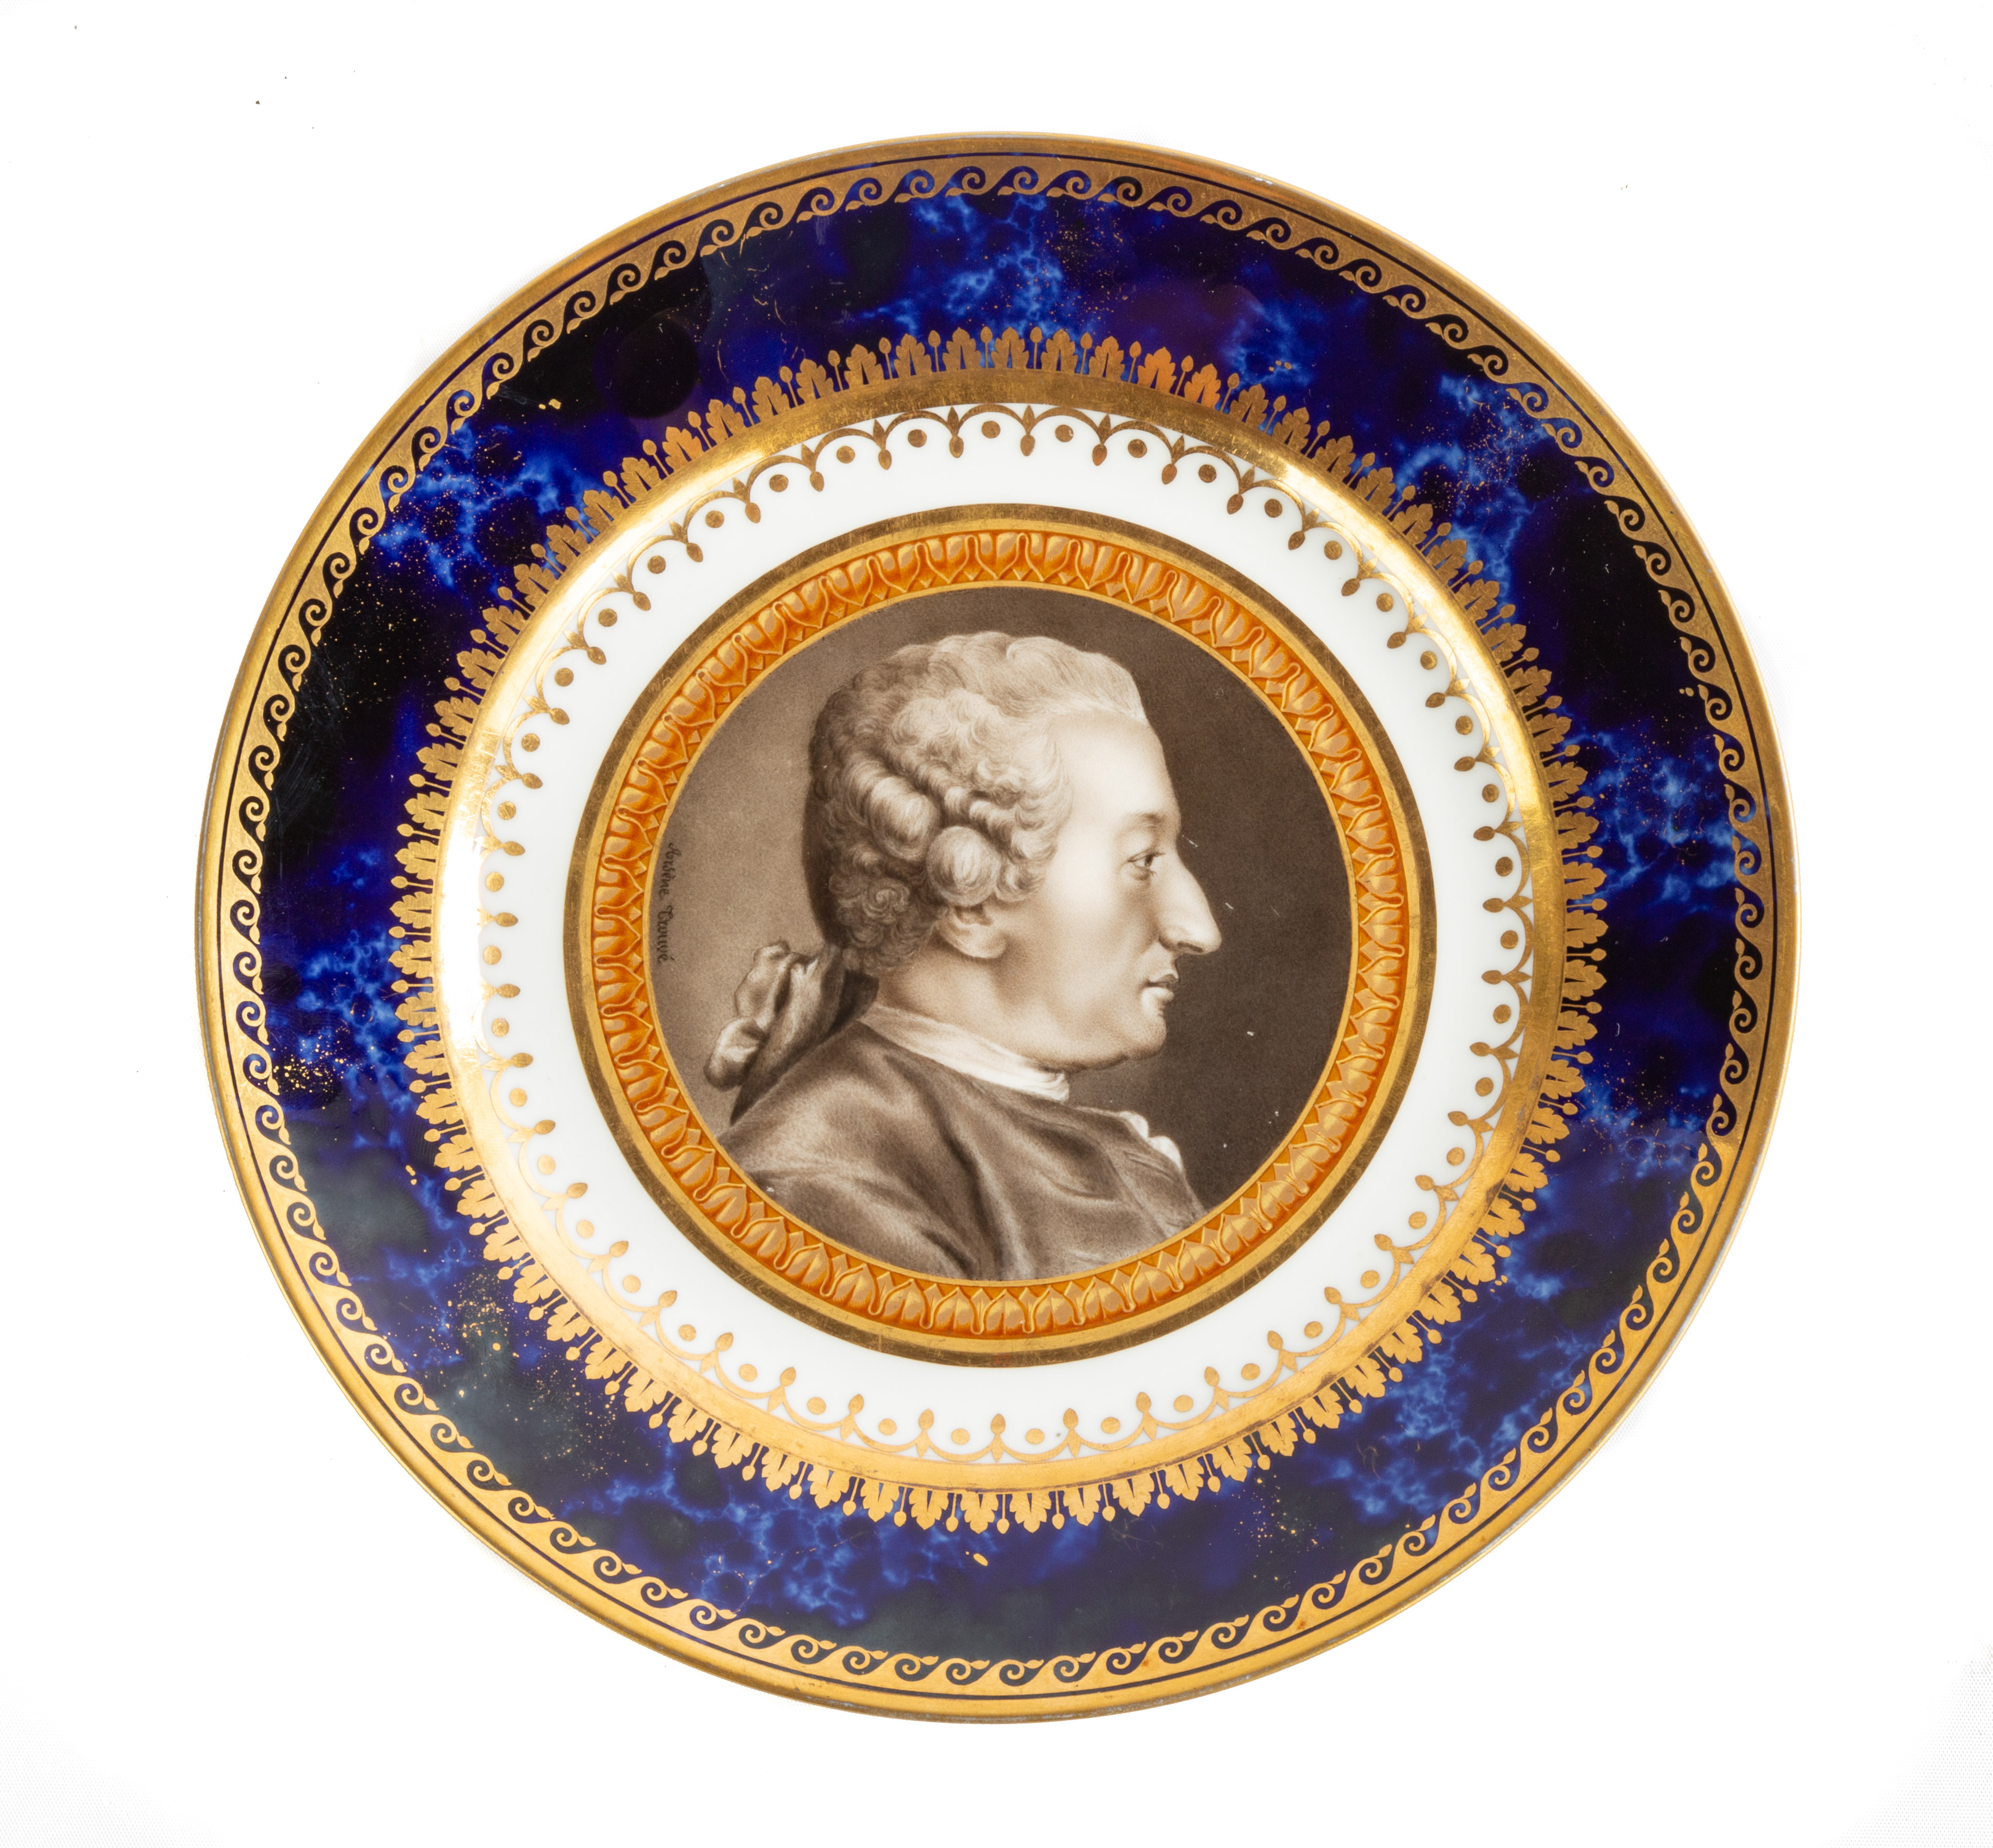 RARE S VRES PORCELAIN PLATE FROM 2c893a